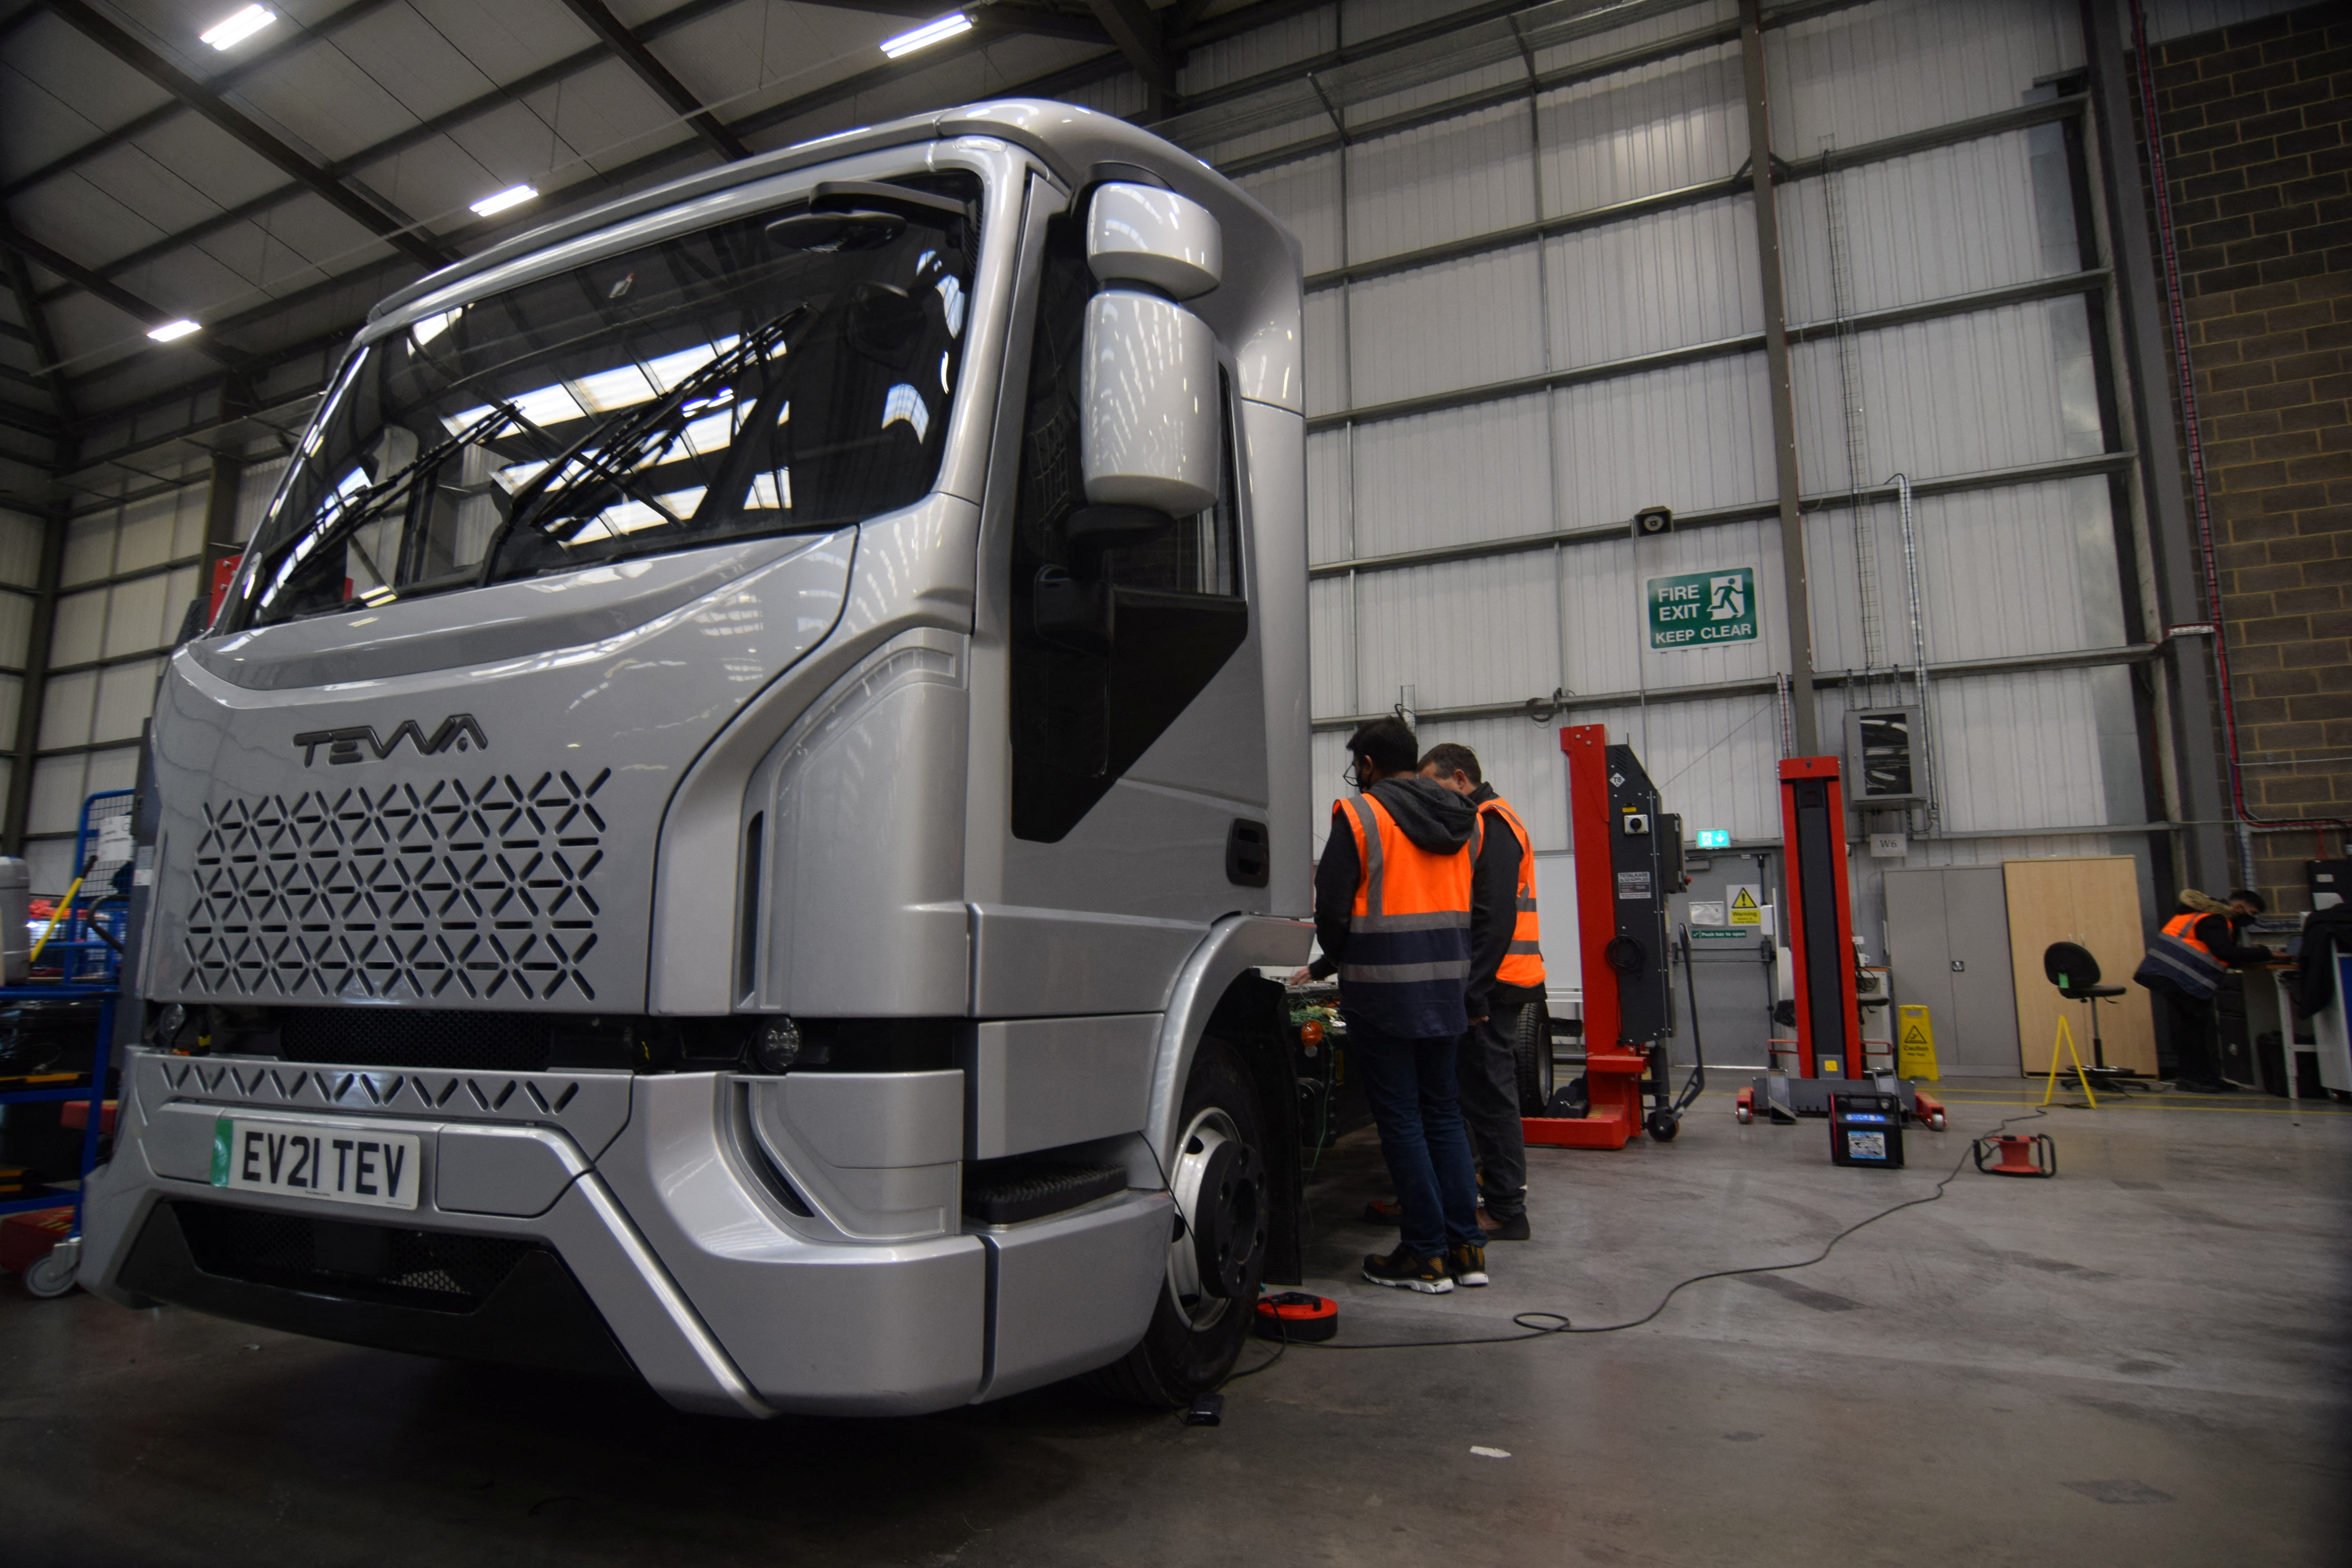 Engineers at electric maker Tevva work on a pre-production prototype truck at the startup's UK plant in Tilbury